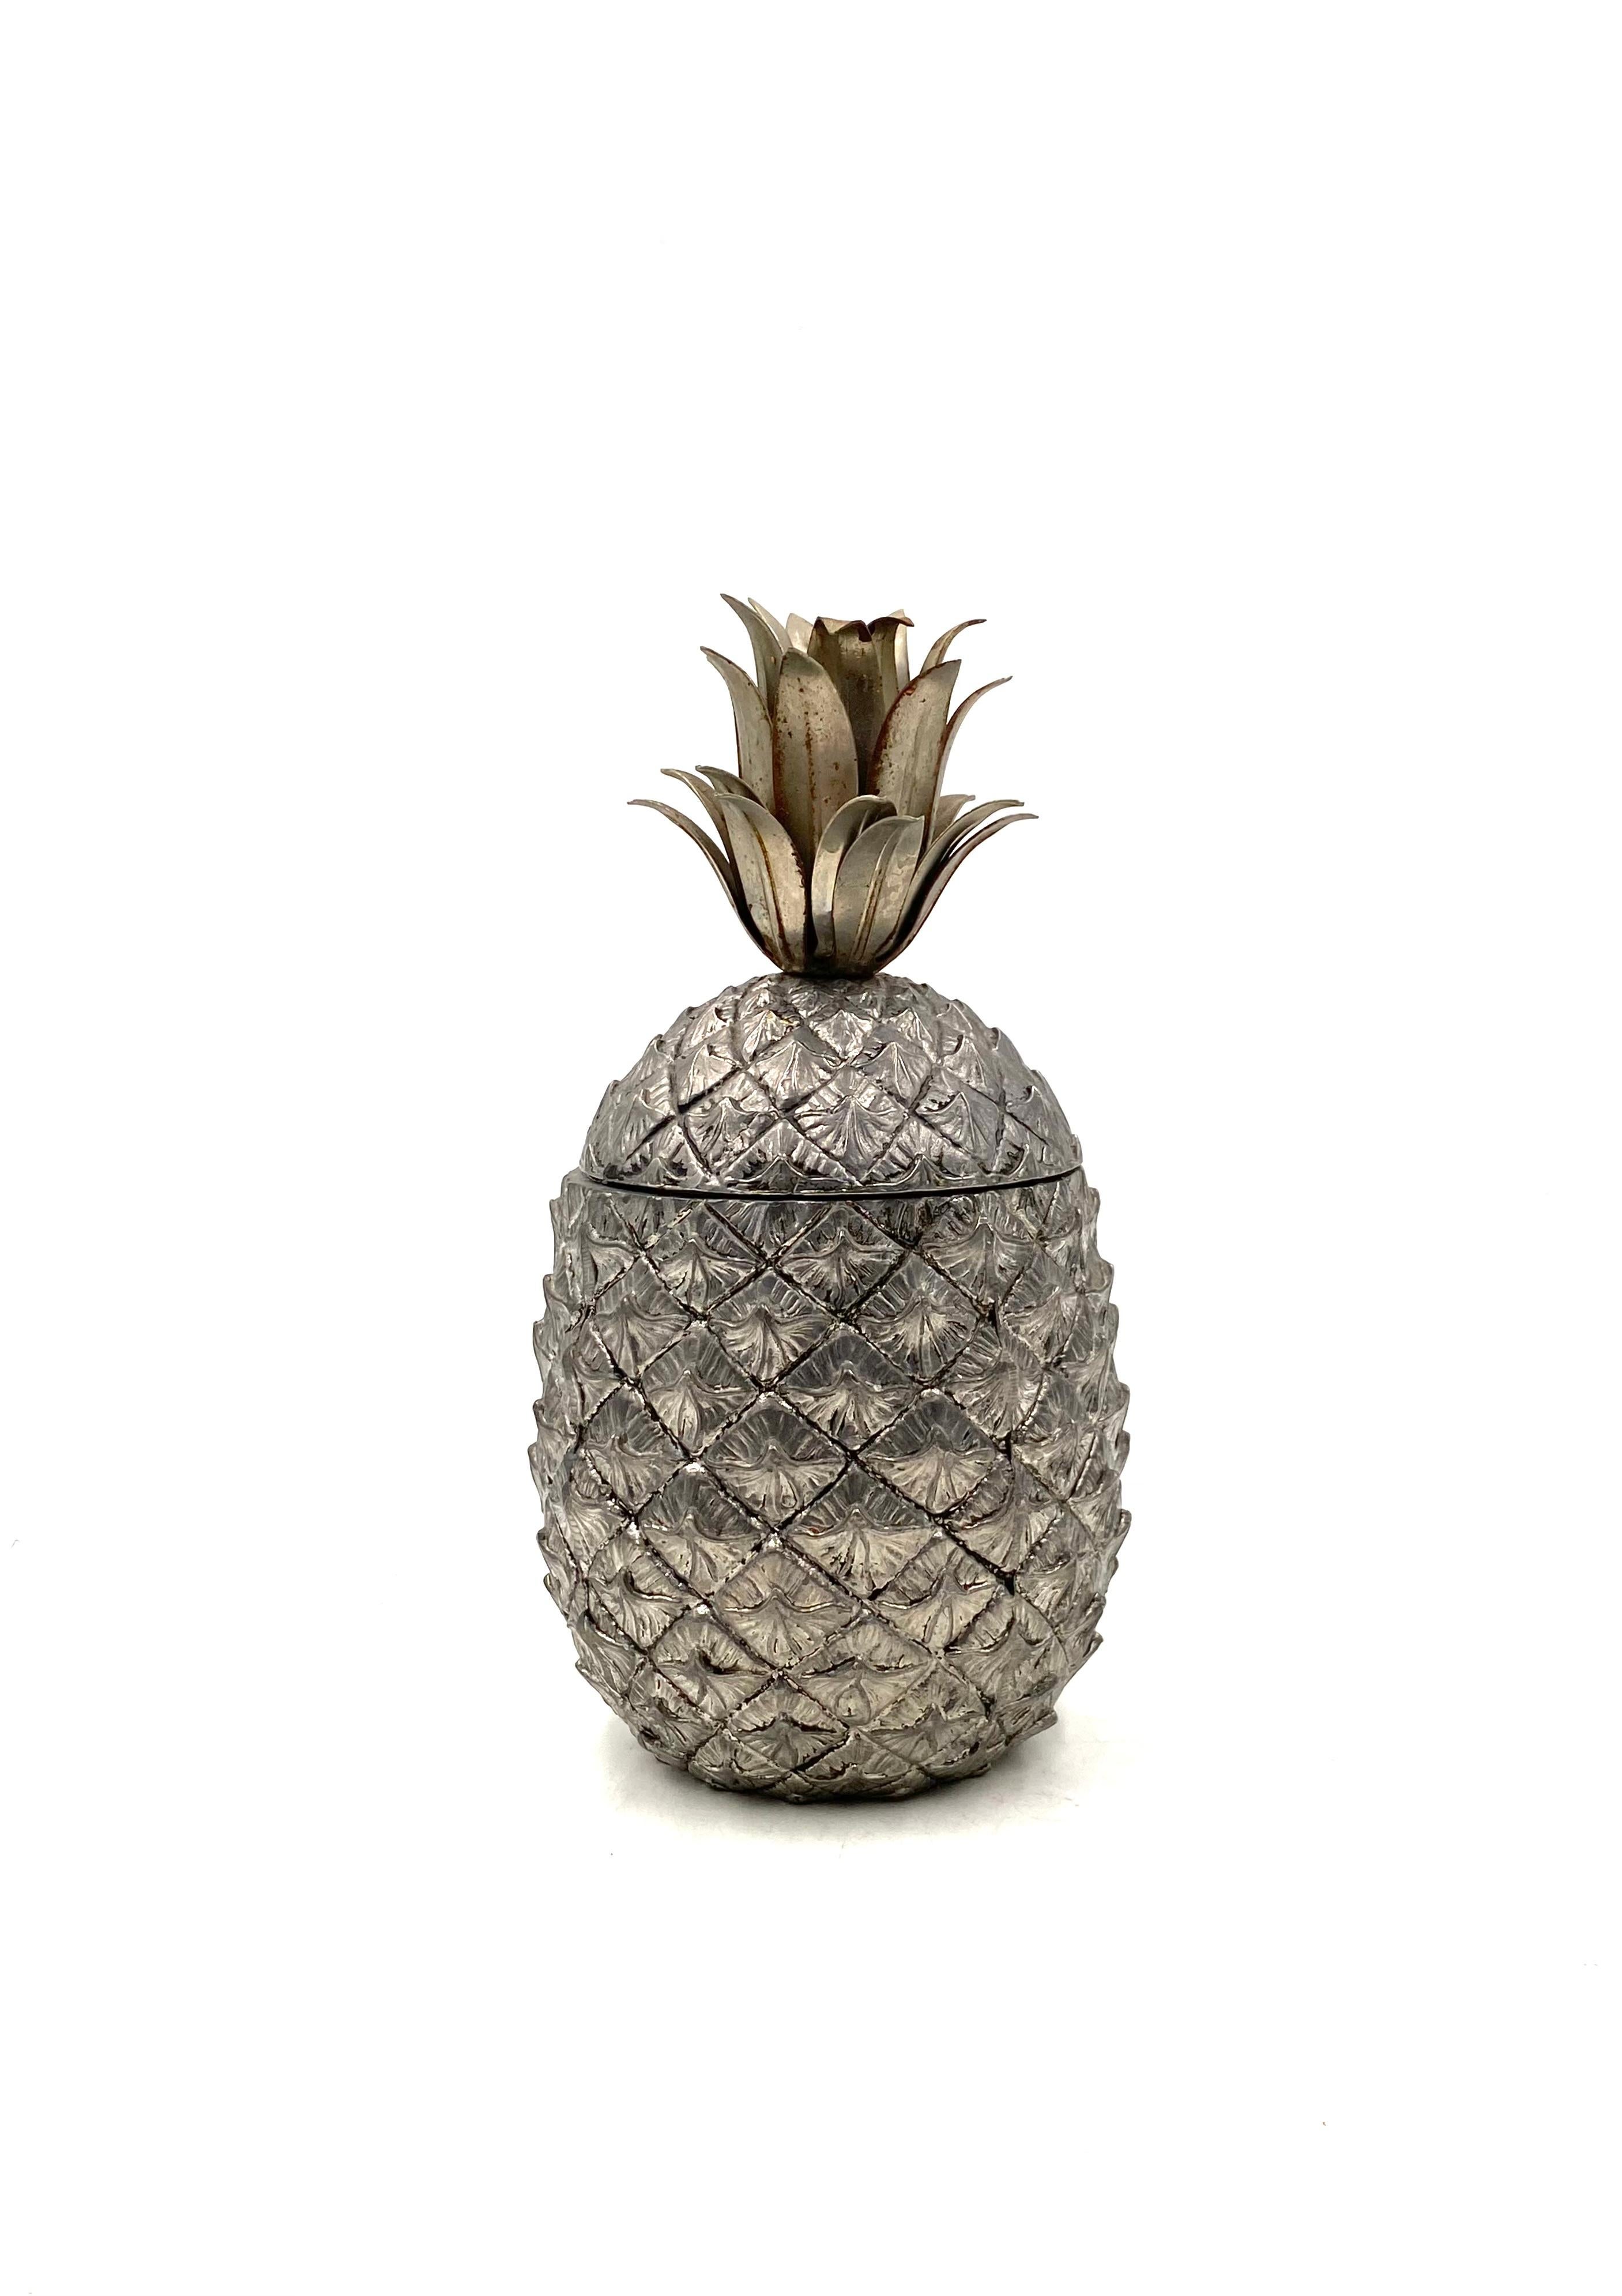 Silvered Pineapple Ice Bucket, Mauro Manetti Fonderie d'Arte, Italy 1970s 1